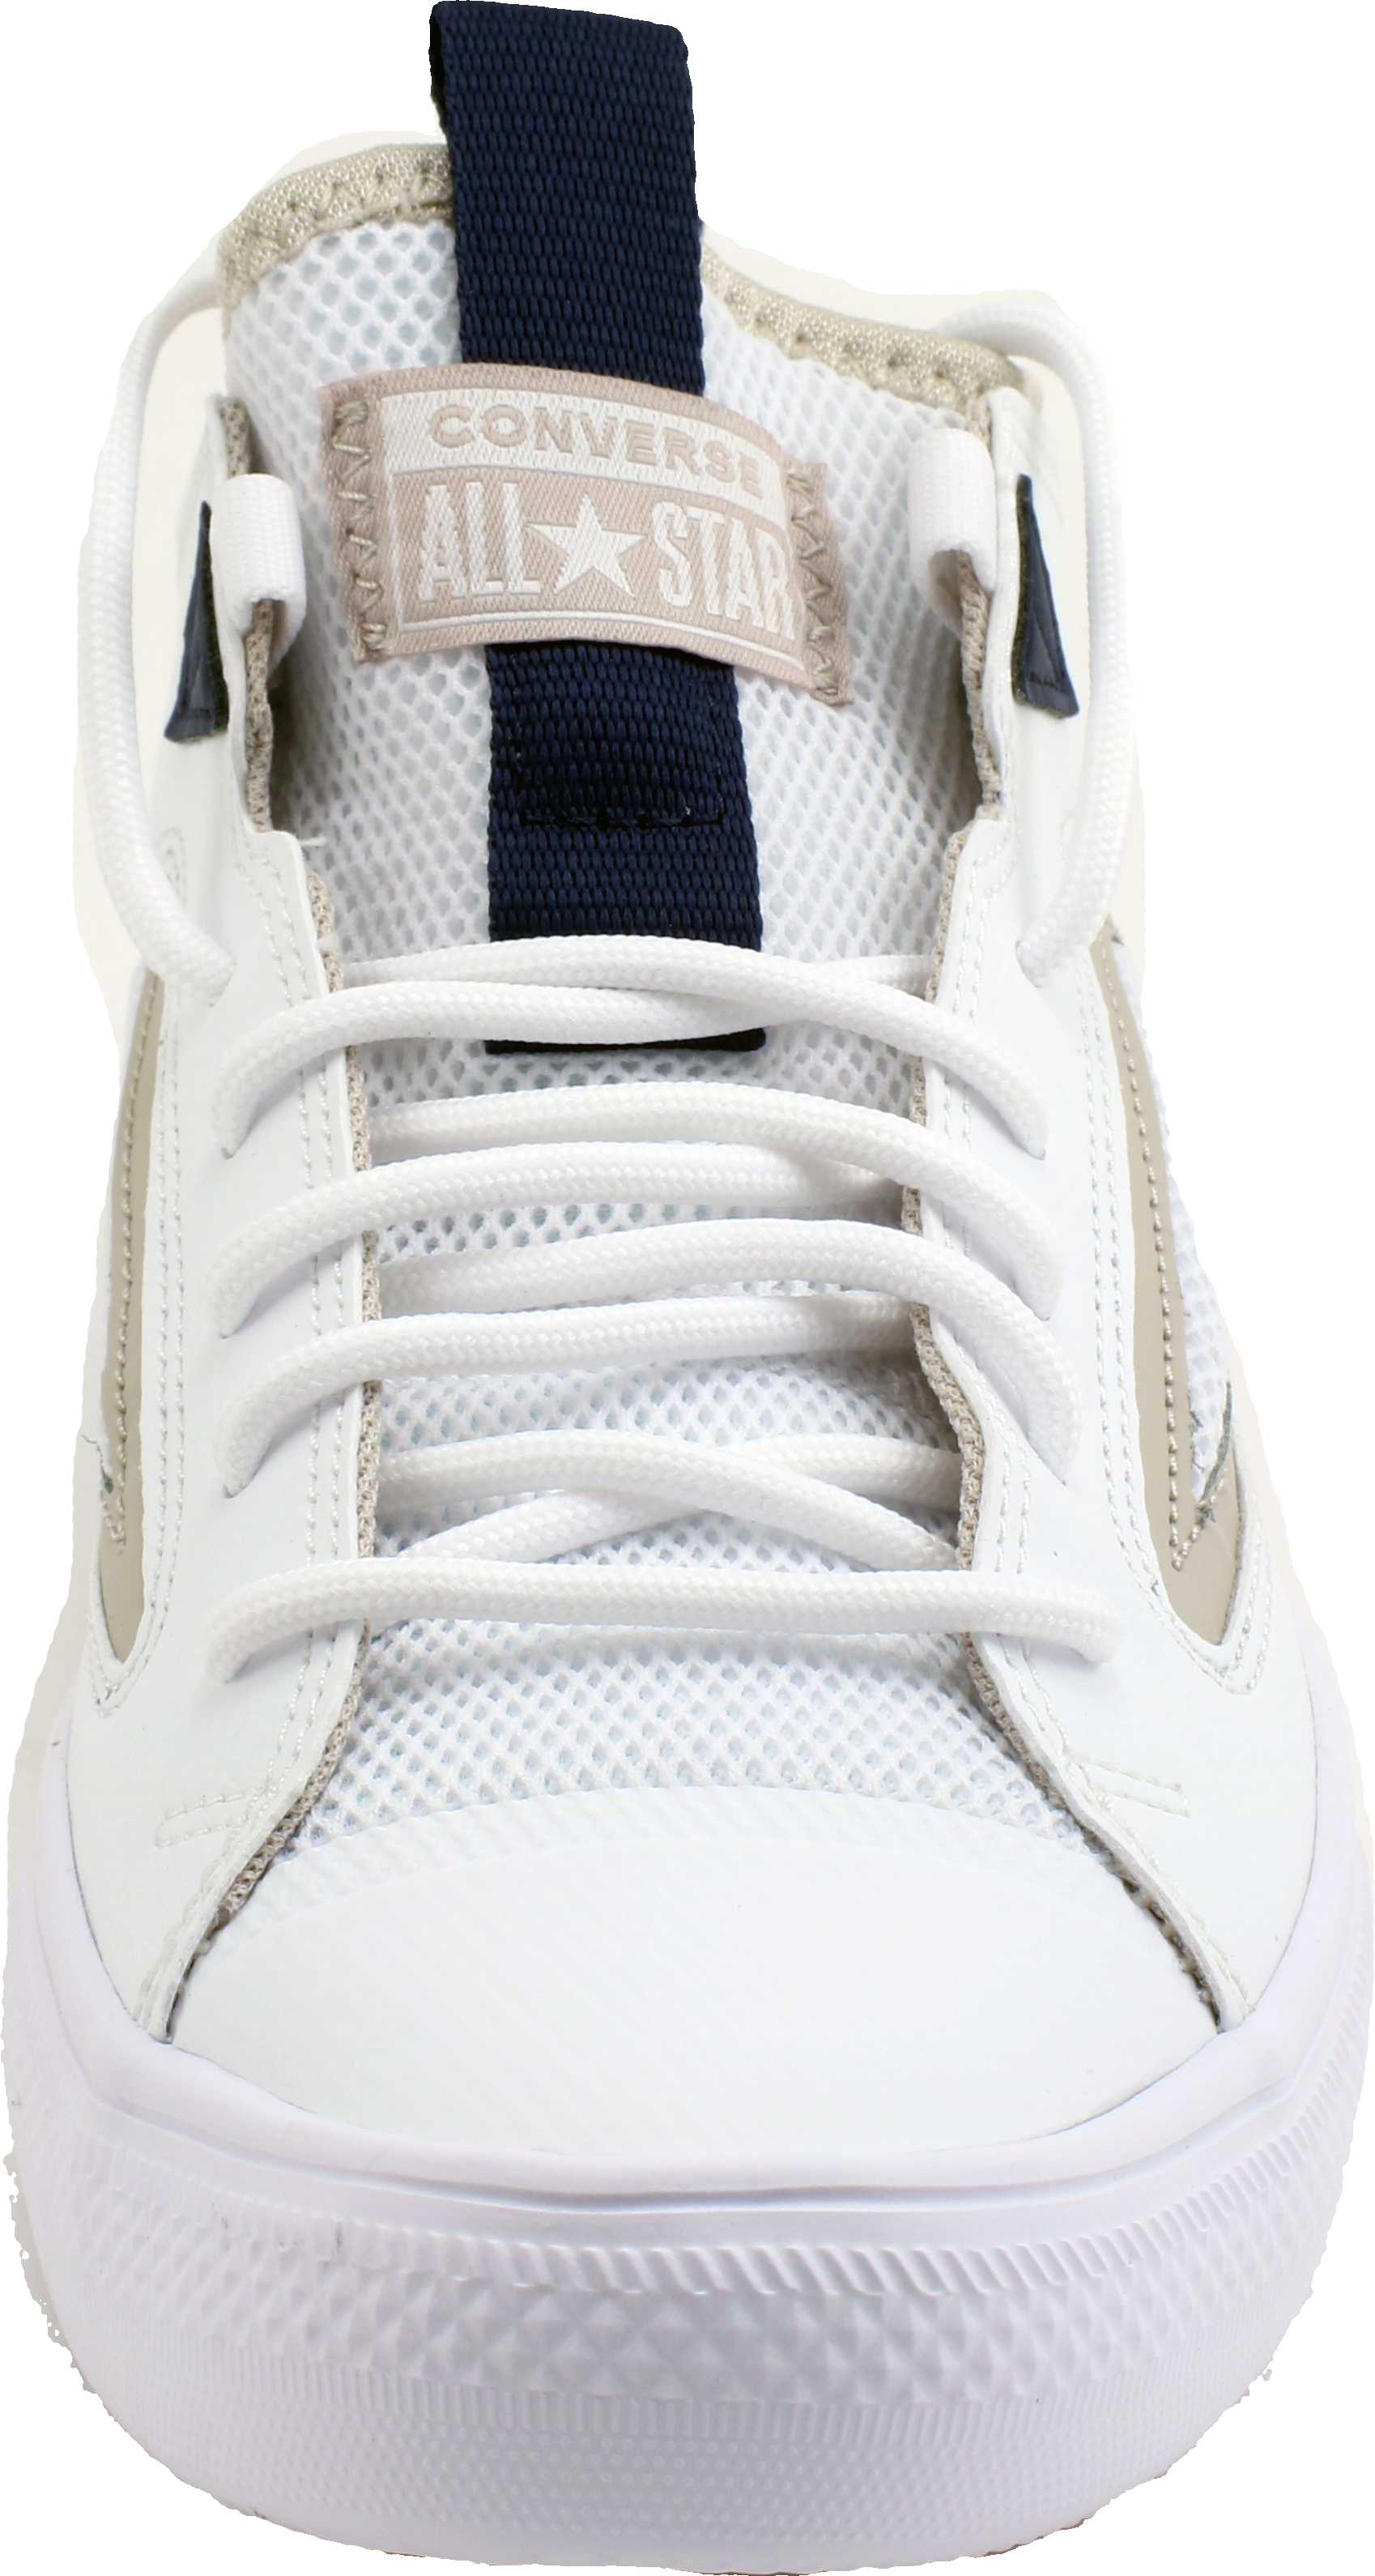 Converse Chuck Taylor All Star Ultra Surface Fusion - Ox - White / String / Midnight Navy Imitation leather